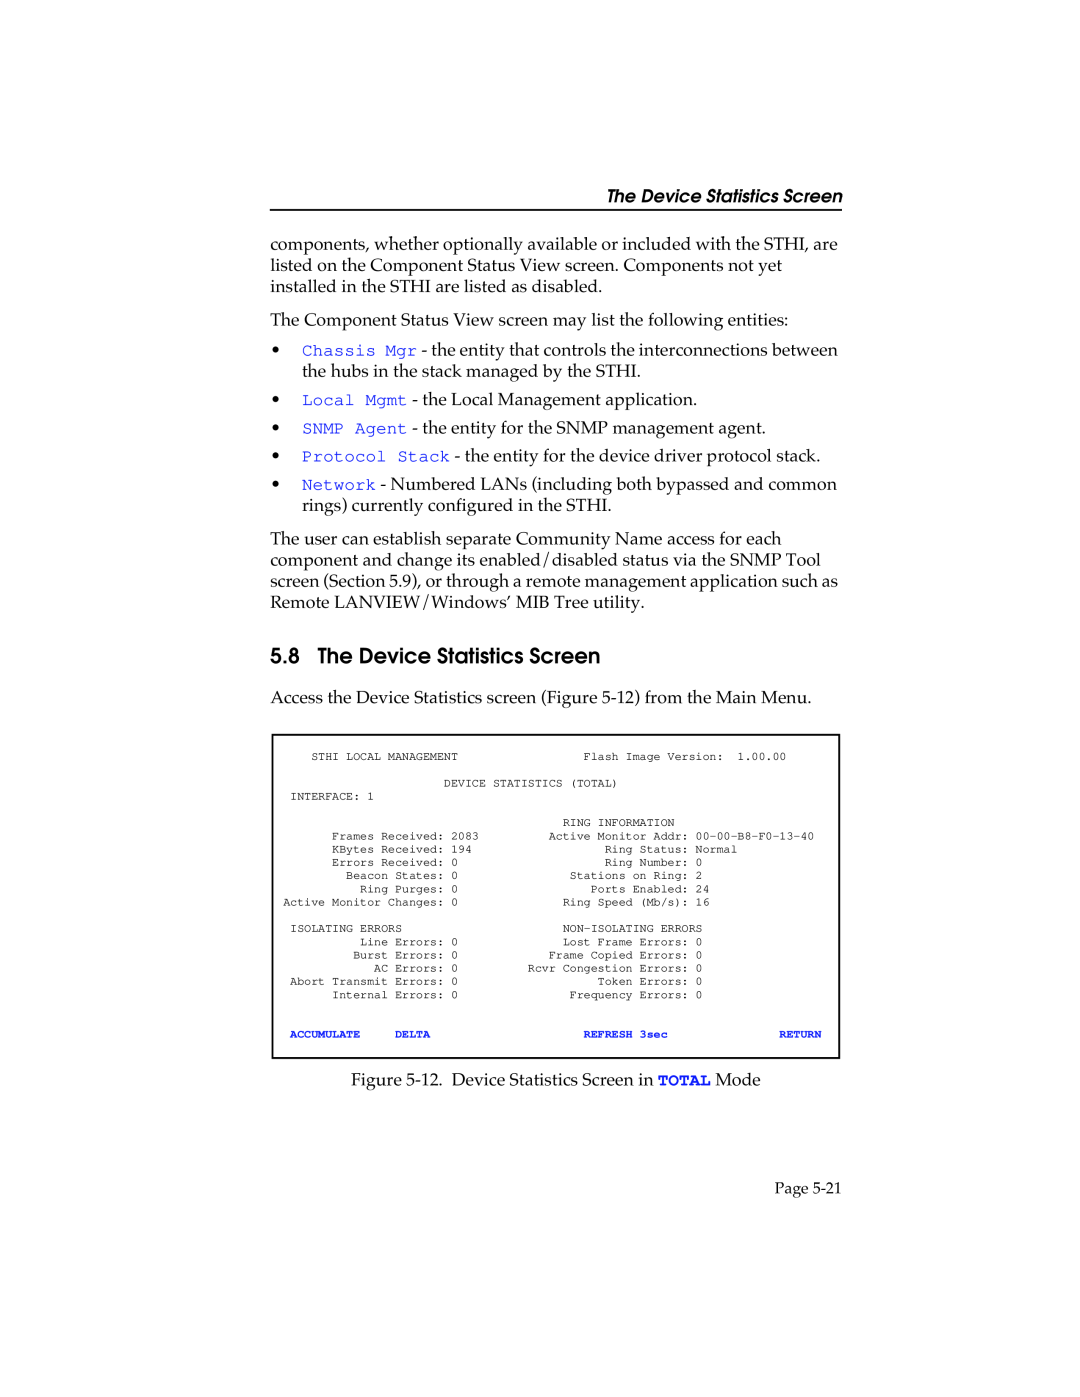 Cabletron Systems STHI manual The Device Statistics Screen 